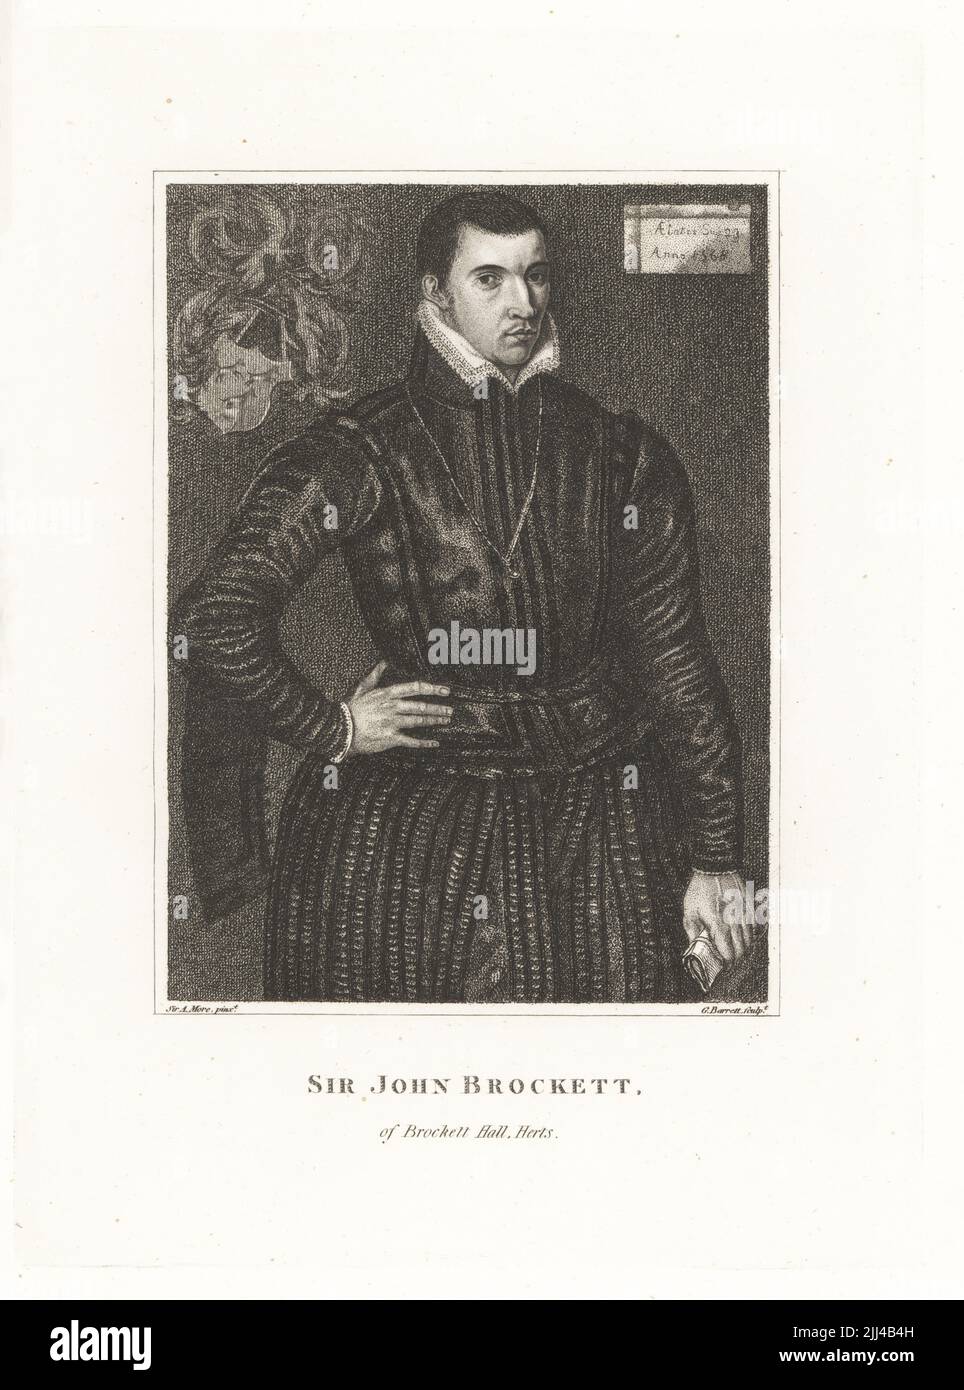 Sir John Brocket, 1540-1598, English noble, captain of Queen Elizabeth I's personal guard. Sir John Brockett, Brockett Hall, Herts. In lace collar, quilted doublet and hose, coat of arms behind him. Copperplate engraving by G. Barrett after a painting by Sir Anthony More dated 1568 from Samuel Woodburn’s Gallery of Rare Portraits Consisting of Original Plates, George Jones, 102 St Martin’s Lane, London, 1816. Stock Photo